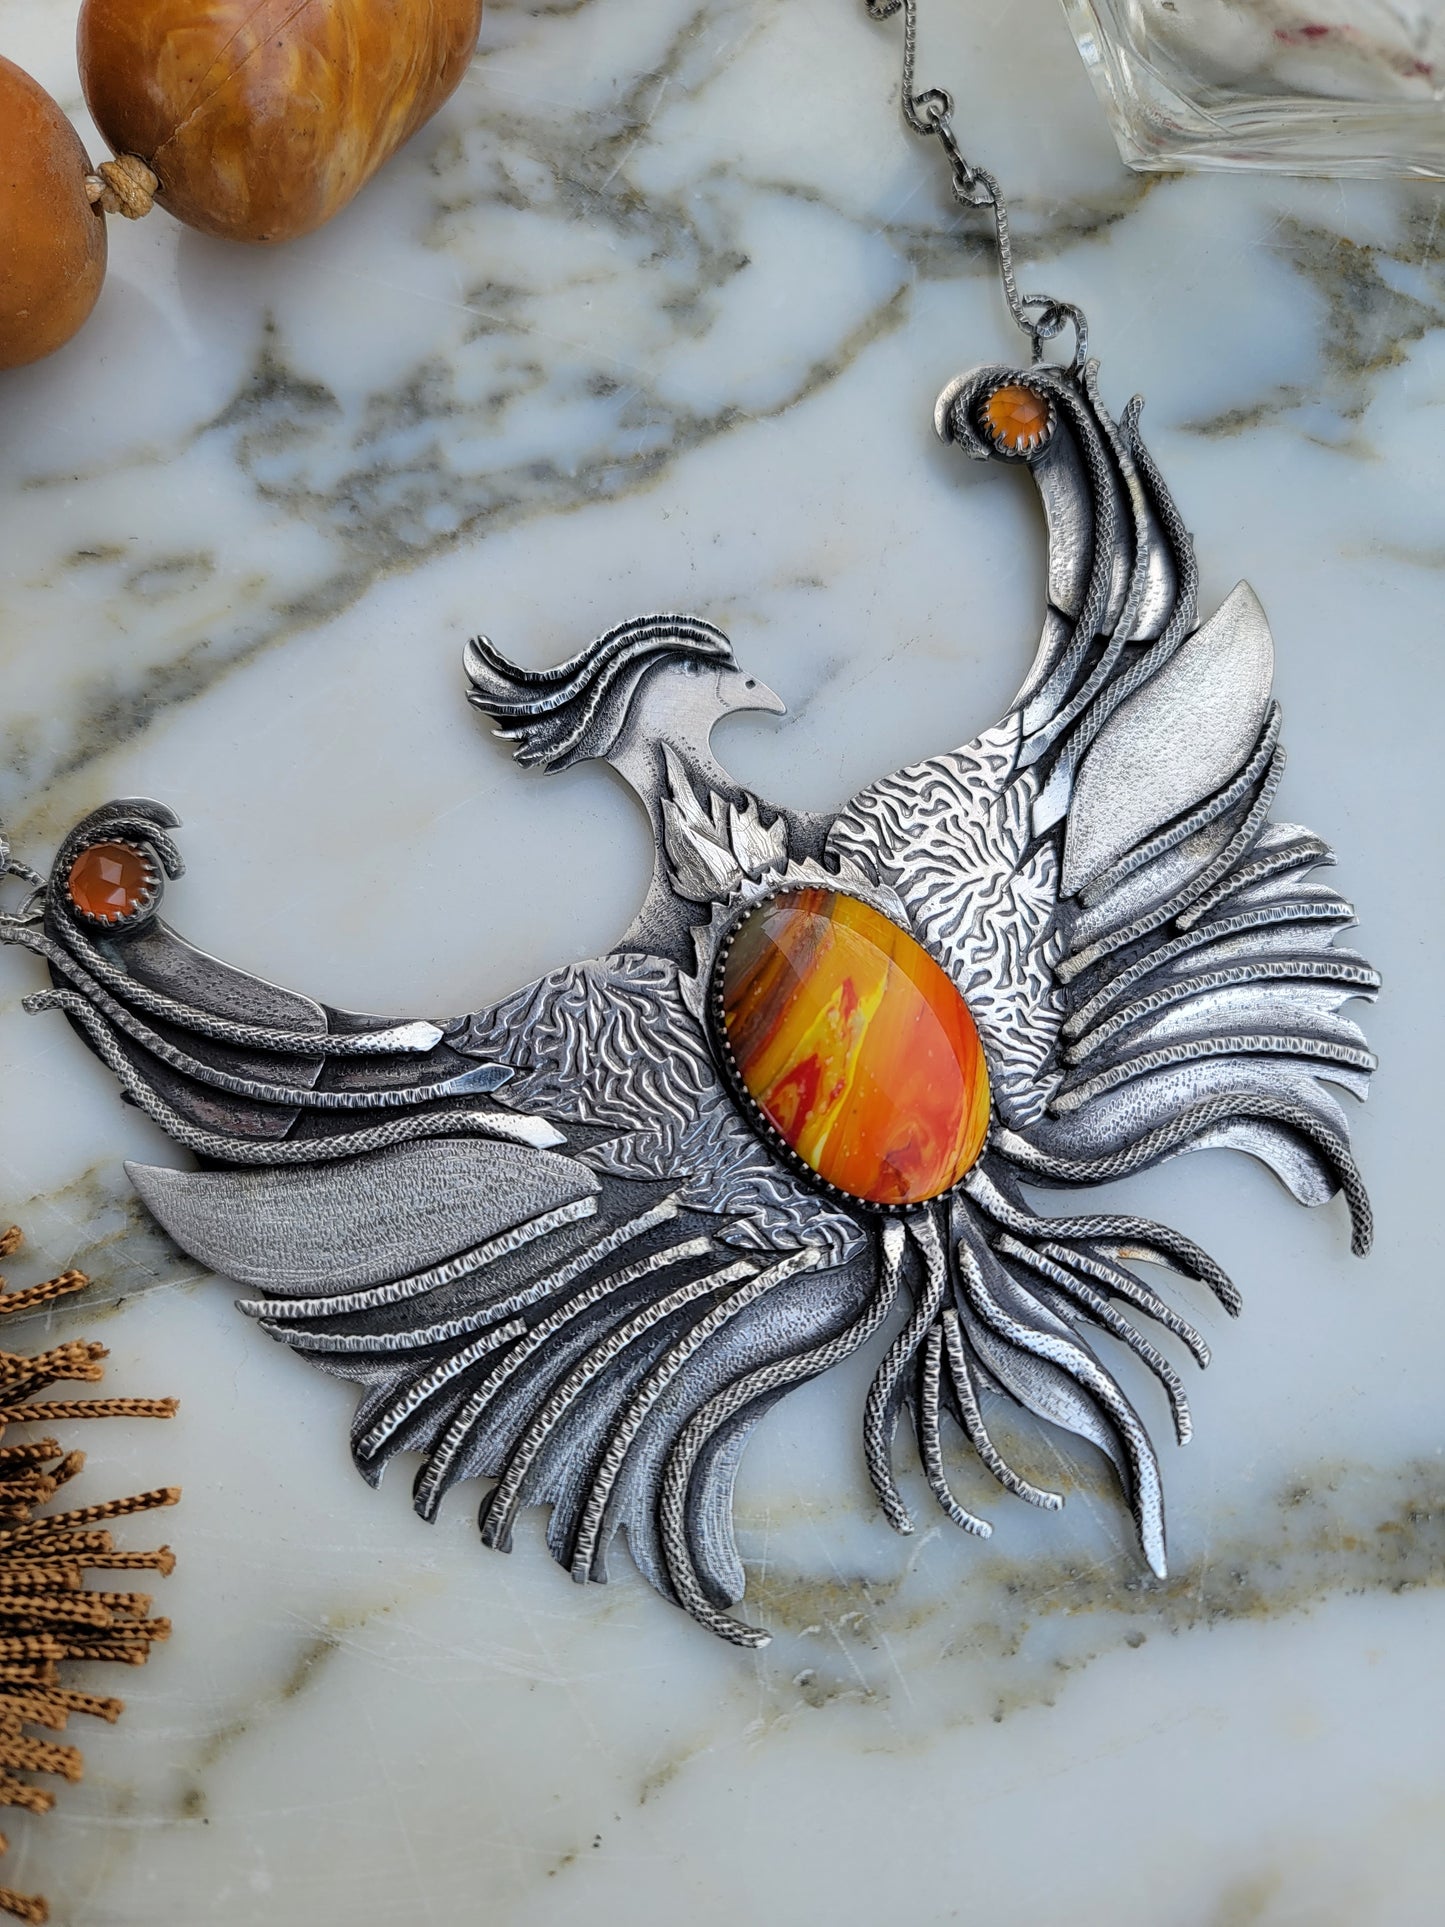 XX//PHOENIX RISING::Statement Necklace - Handcrafted with Rosarita and Carnelian in All Fine and Sterling Silver